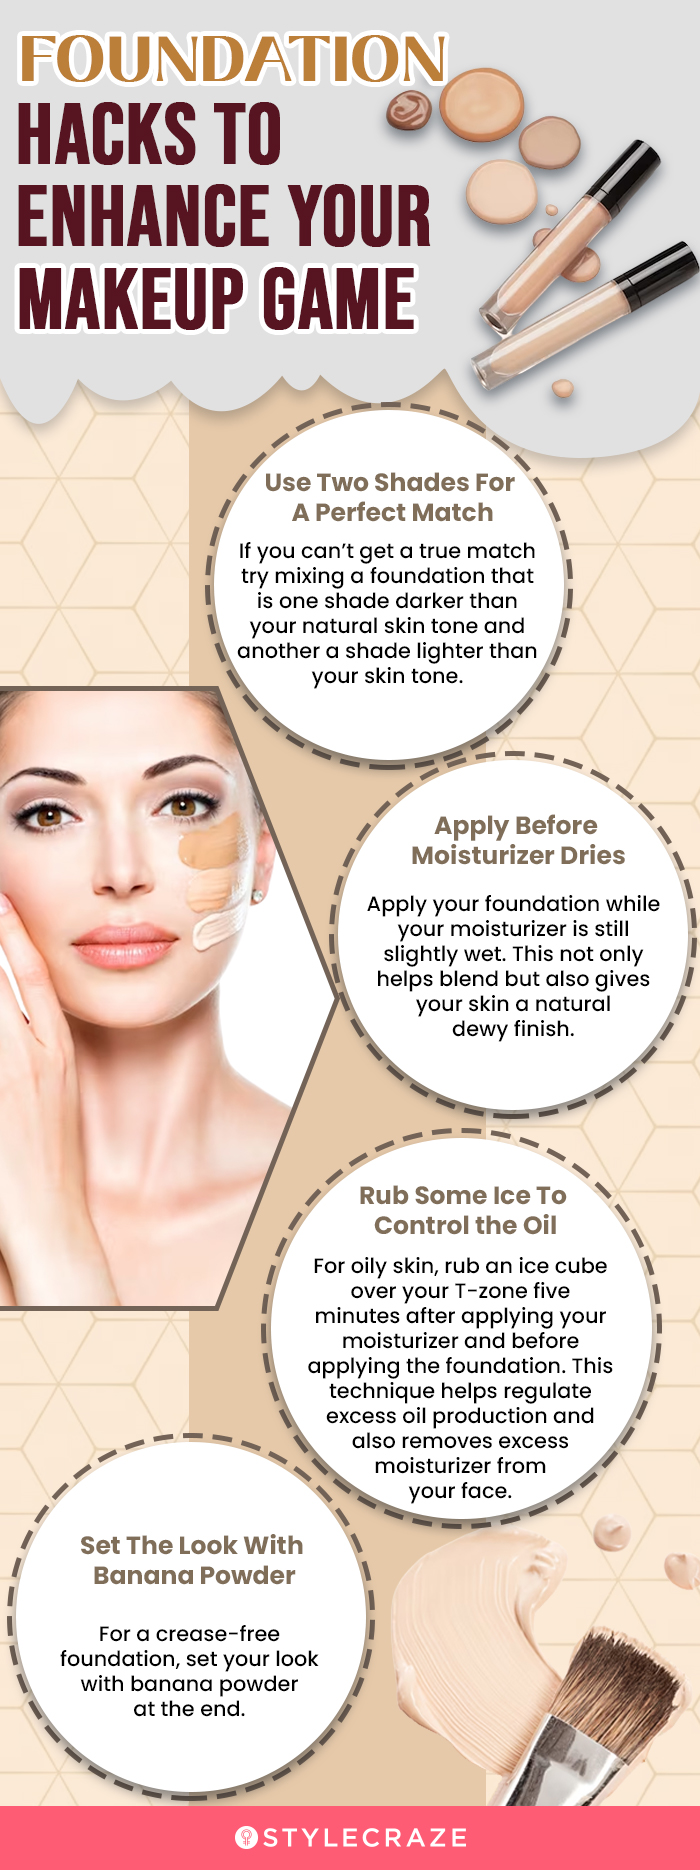 Foundation Hacks To Enhance Your Makeup Game (infographic)